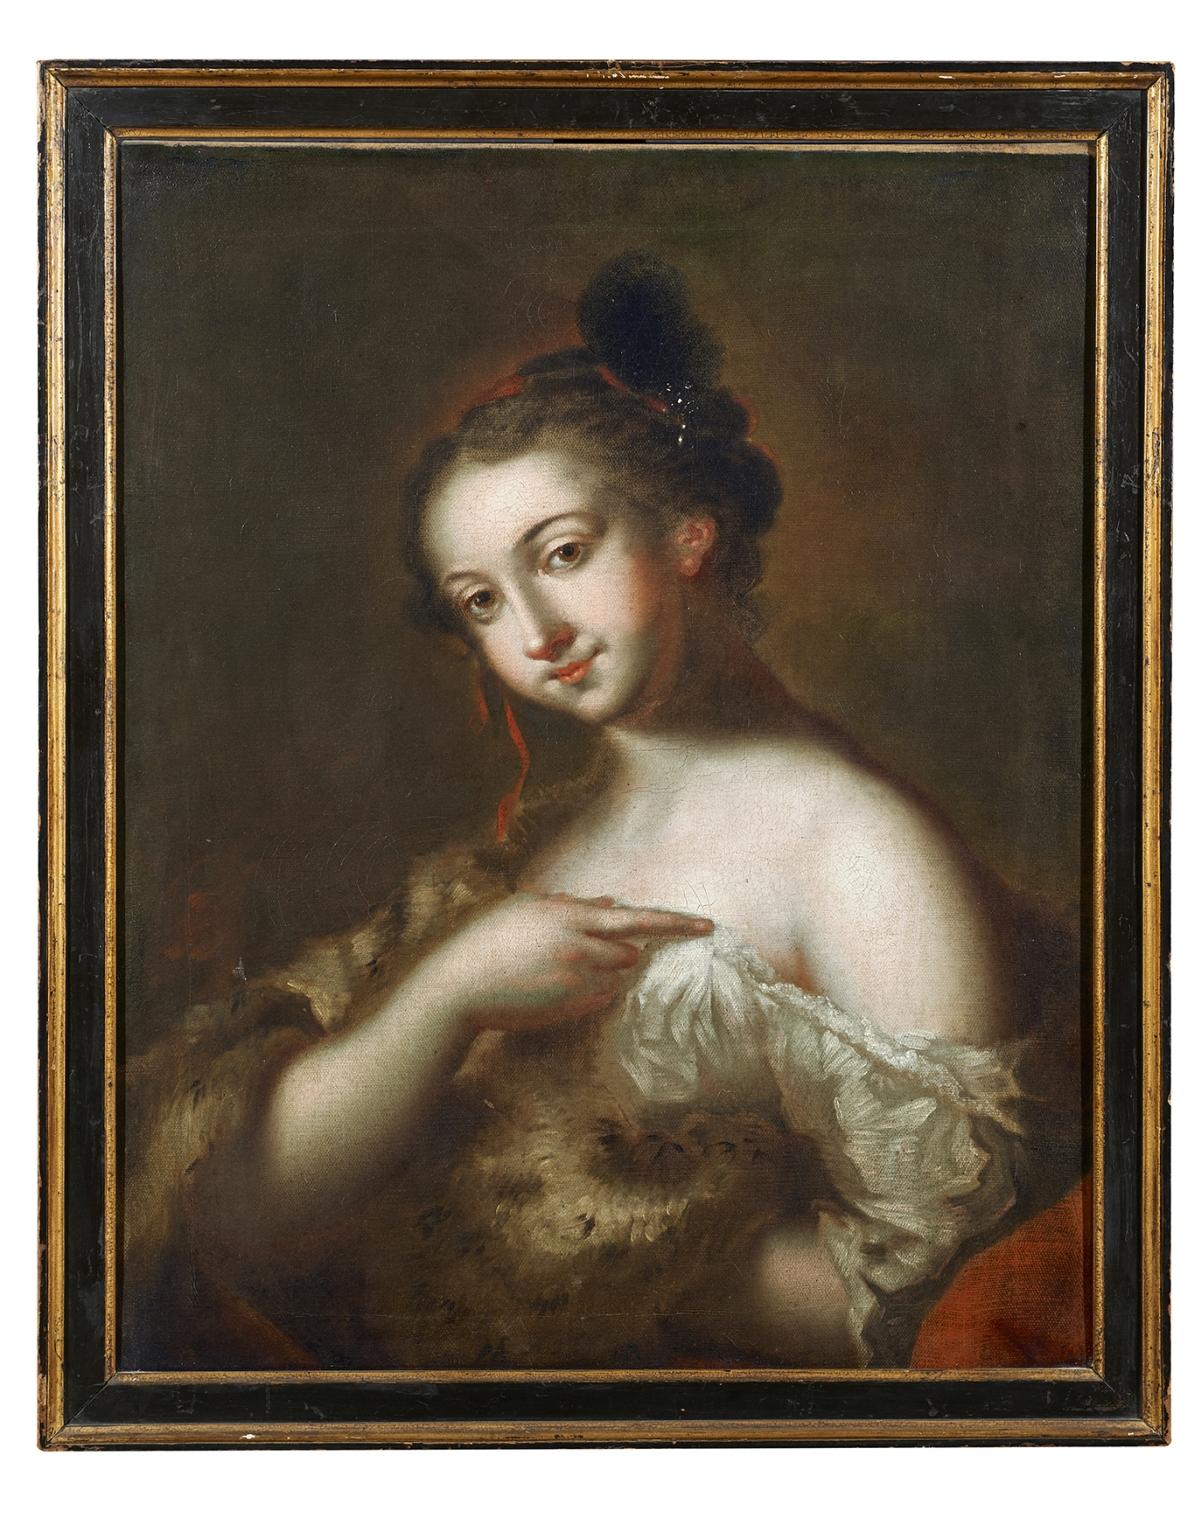 Painting oil on canvas, with dimensions of 64 x 50 cm without frame and 73 x 59 with frame, of French form and school depicting a seductive girl of the early 18th century.

During the 18th century the portrait is one of the most widespread genres